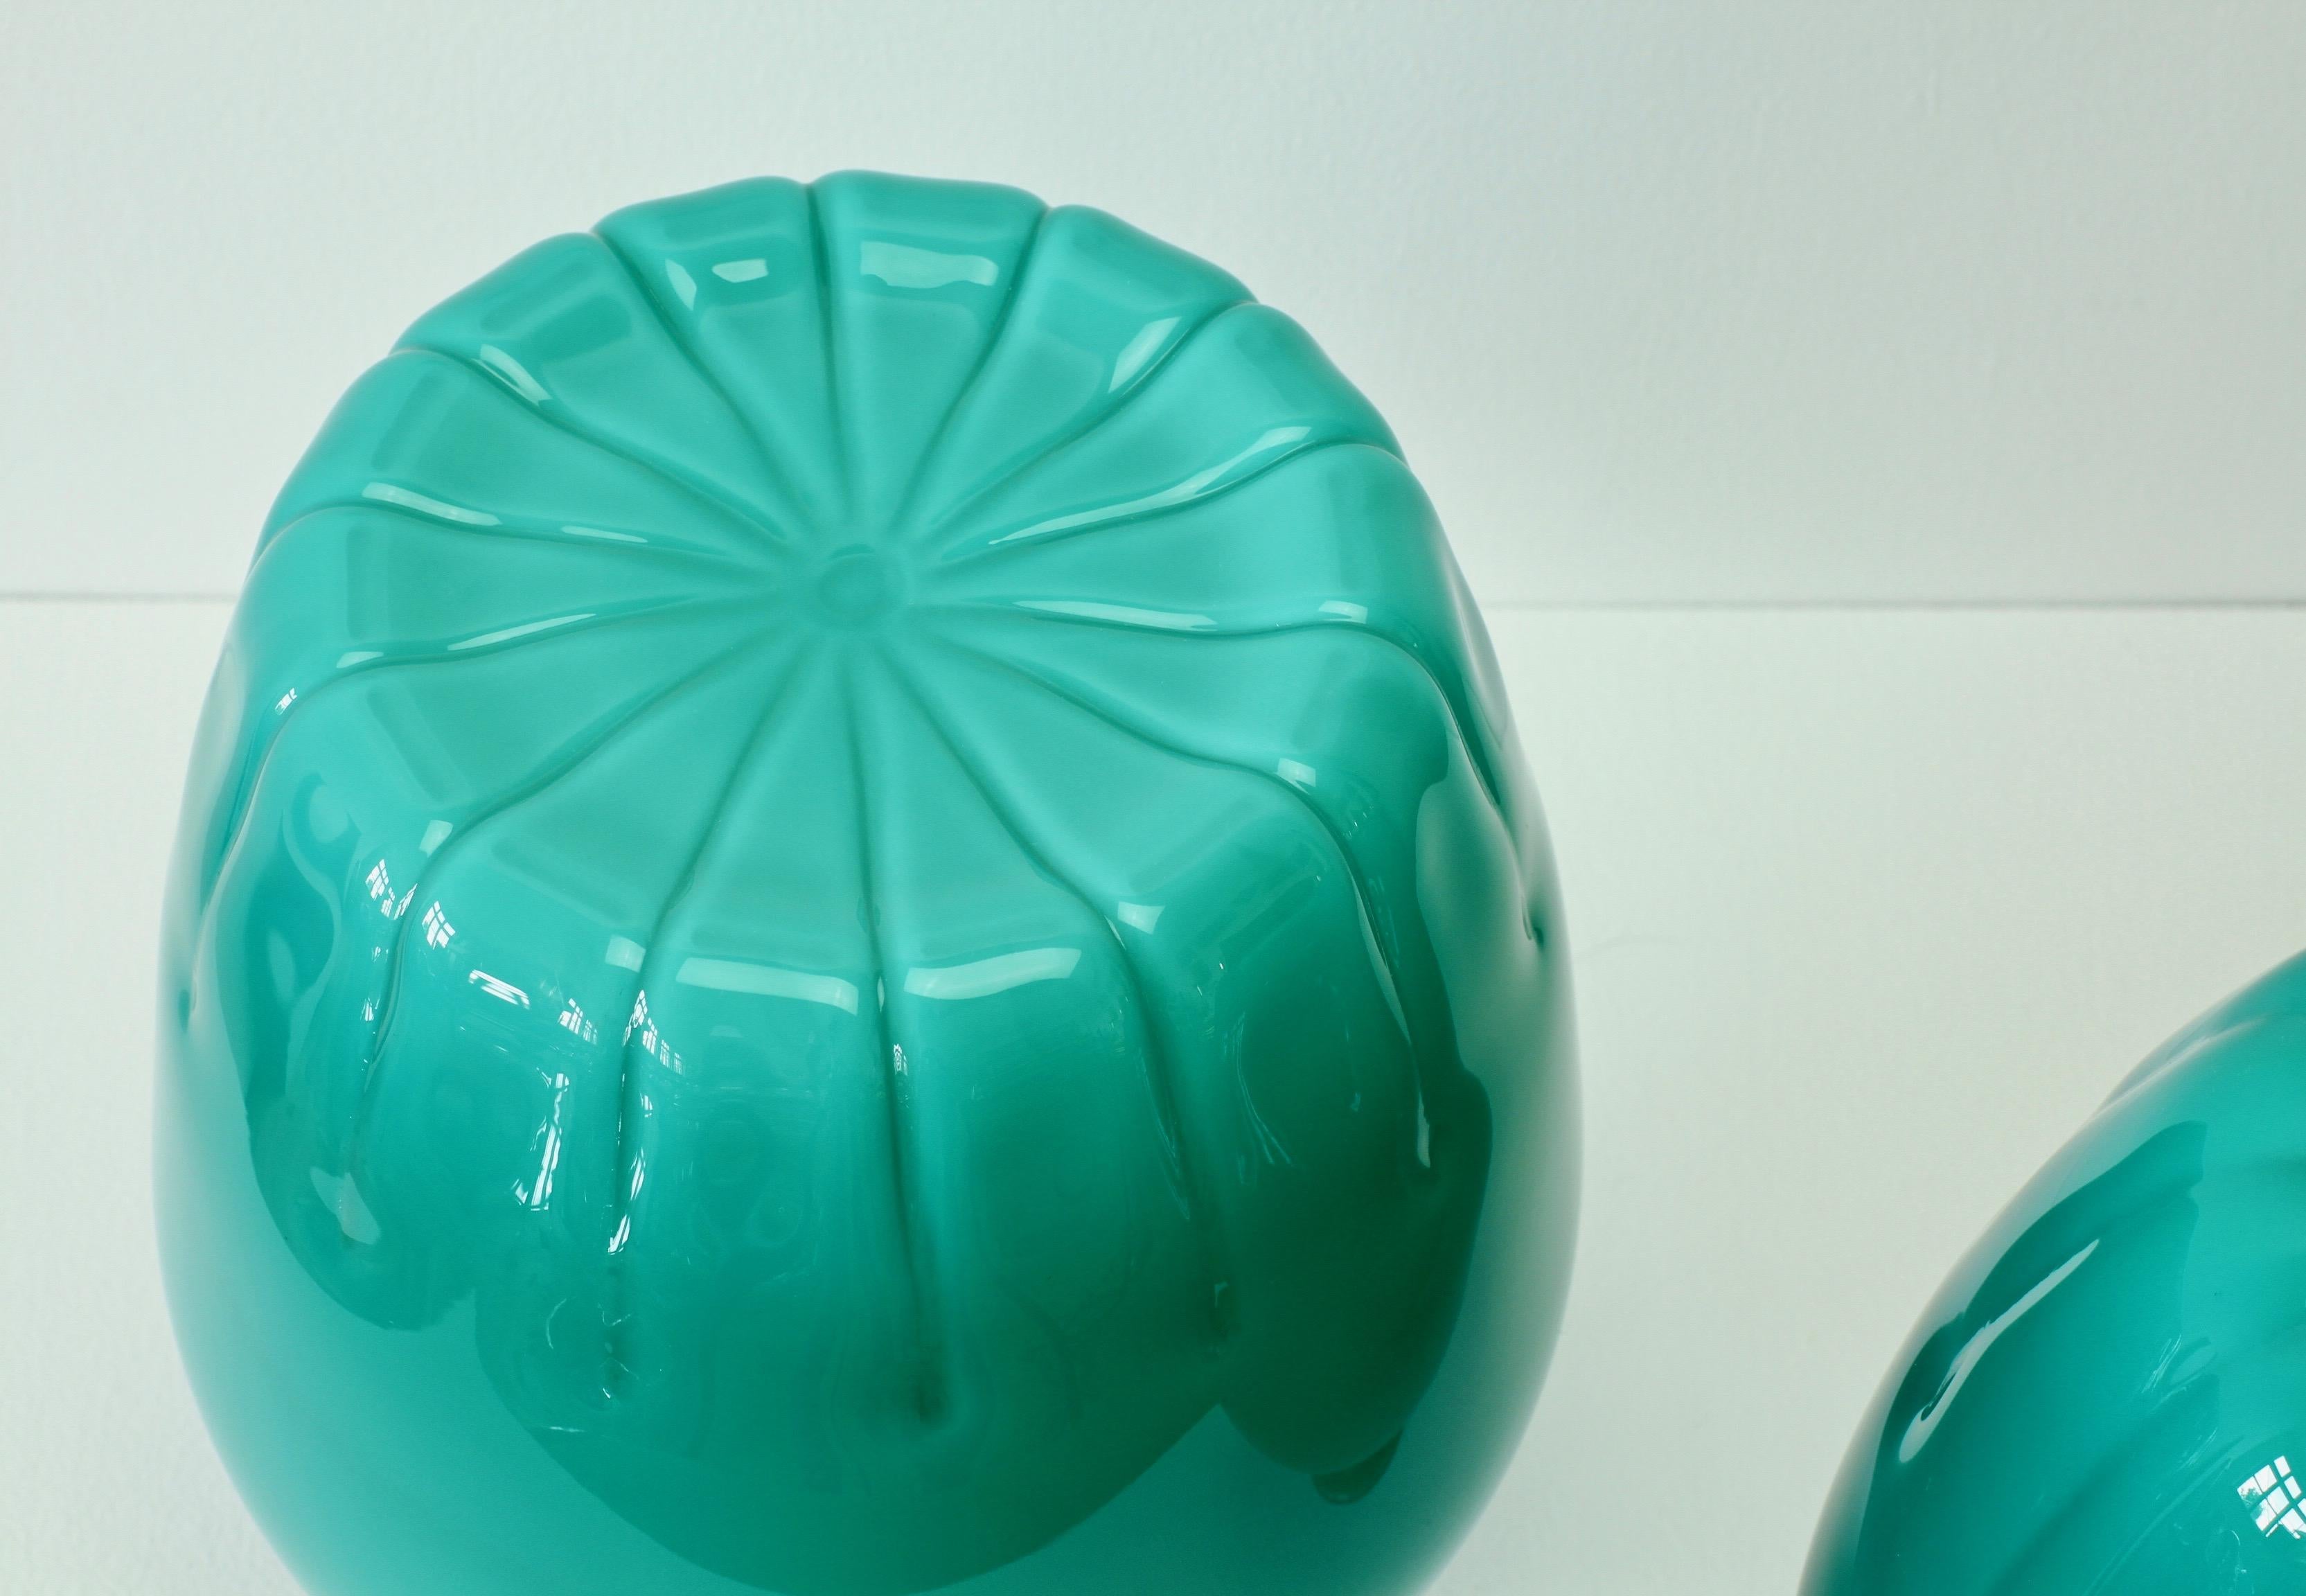 Blown Glass Colorful Cenedese Pair of Teal Green Vintage Italian Murano Glass Vases